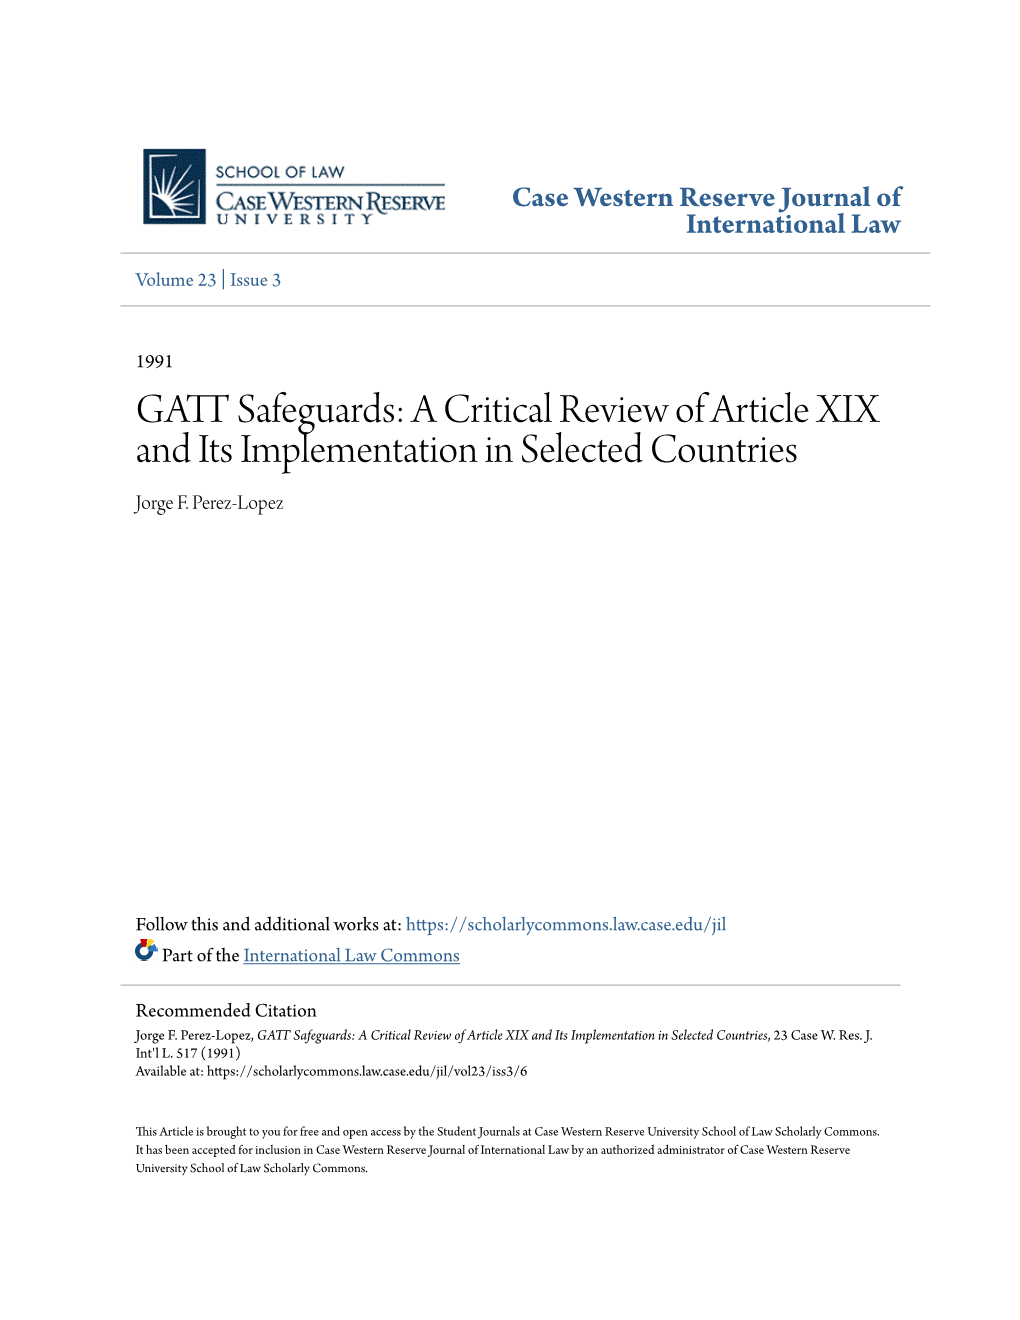 GATT Safeguards: a Critical Review of Article XIX and Its Implementation in Selected Countries, 23 Case W